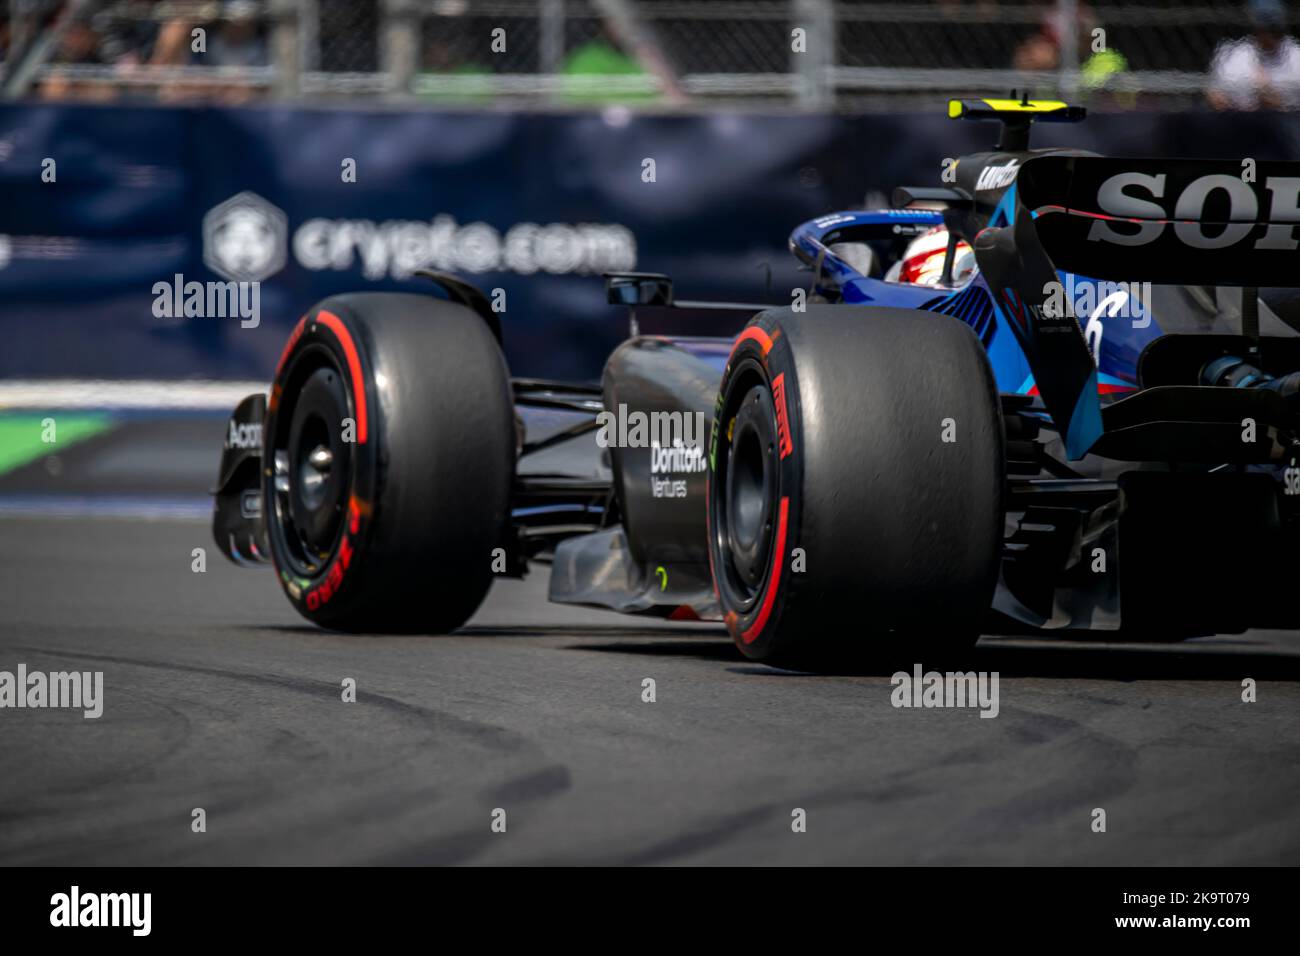 Mexico City, Mexico, 30th Oct 2022, Nicholas Latifi, from Canada competes for Williams Racing. Qualifying, round 20 of the 2022 Formula 1 championship. Credit: Michael Potts/Alamy Live News Stock Photo